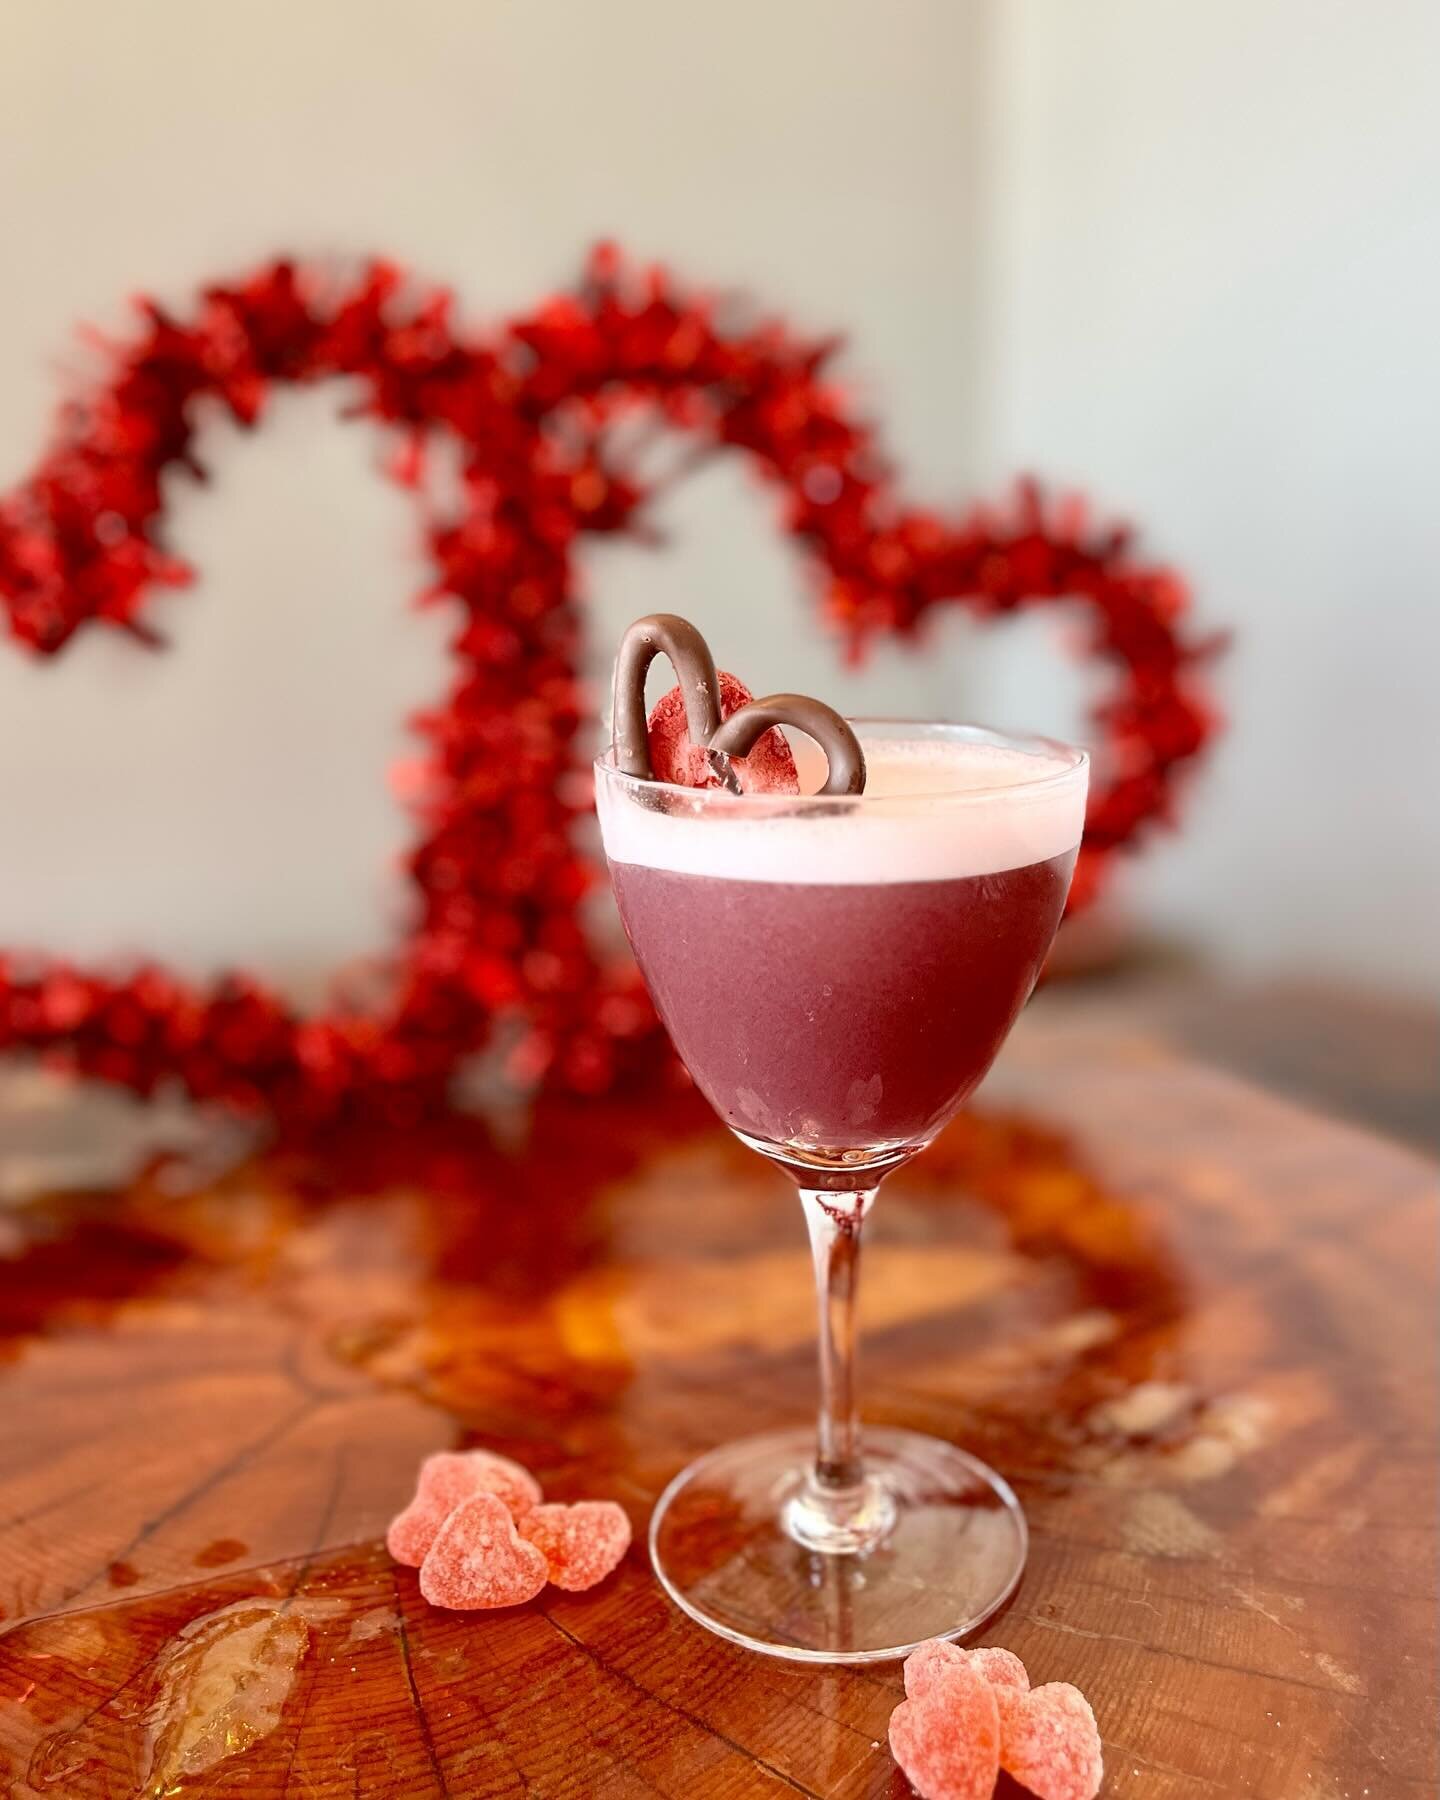 Love is in the air💕 Our Valentine&rsquo;s cocktails are available starting today and run through Sunday the 18th! 

📸 Love Struck: Timber Ridge Gin, black cherry, lemon, egg white

#elevatingspiritslocally #elevation5003distillery #craftcocktail #t